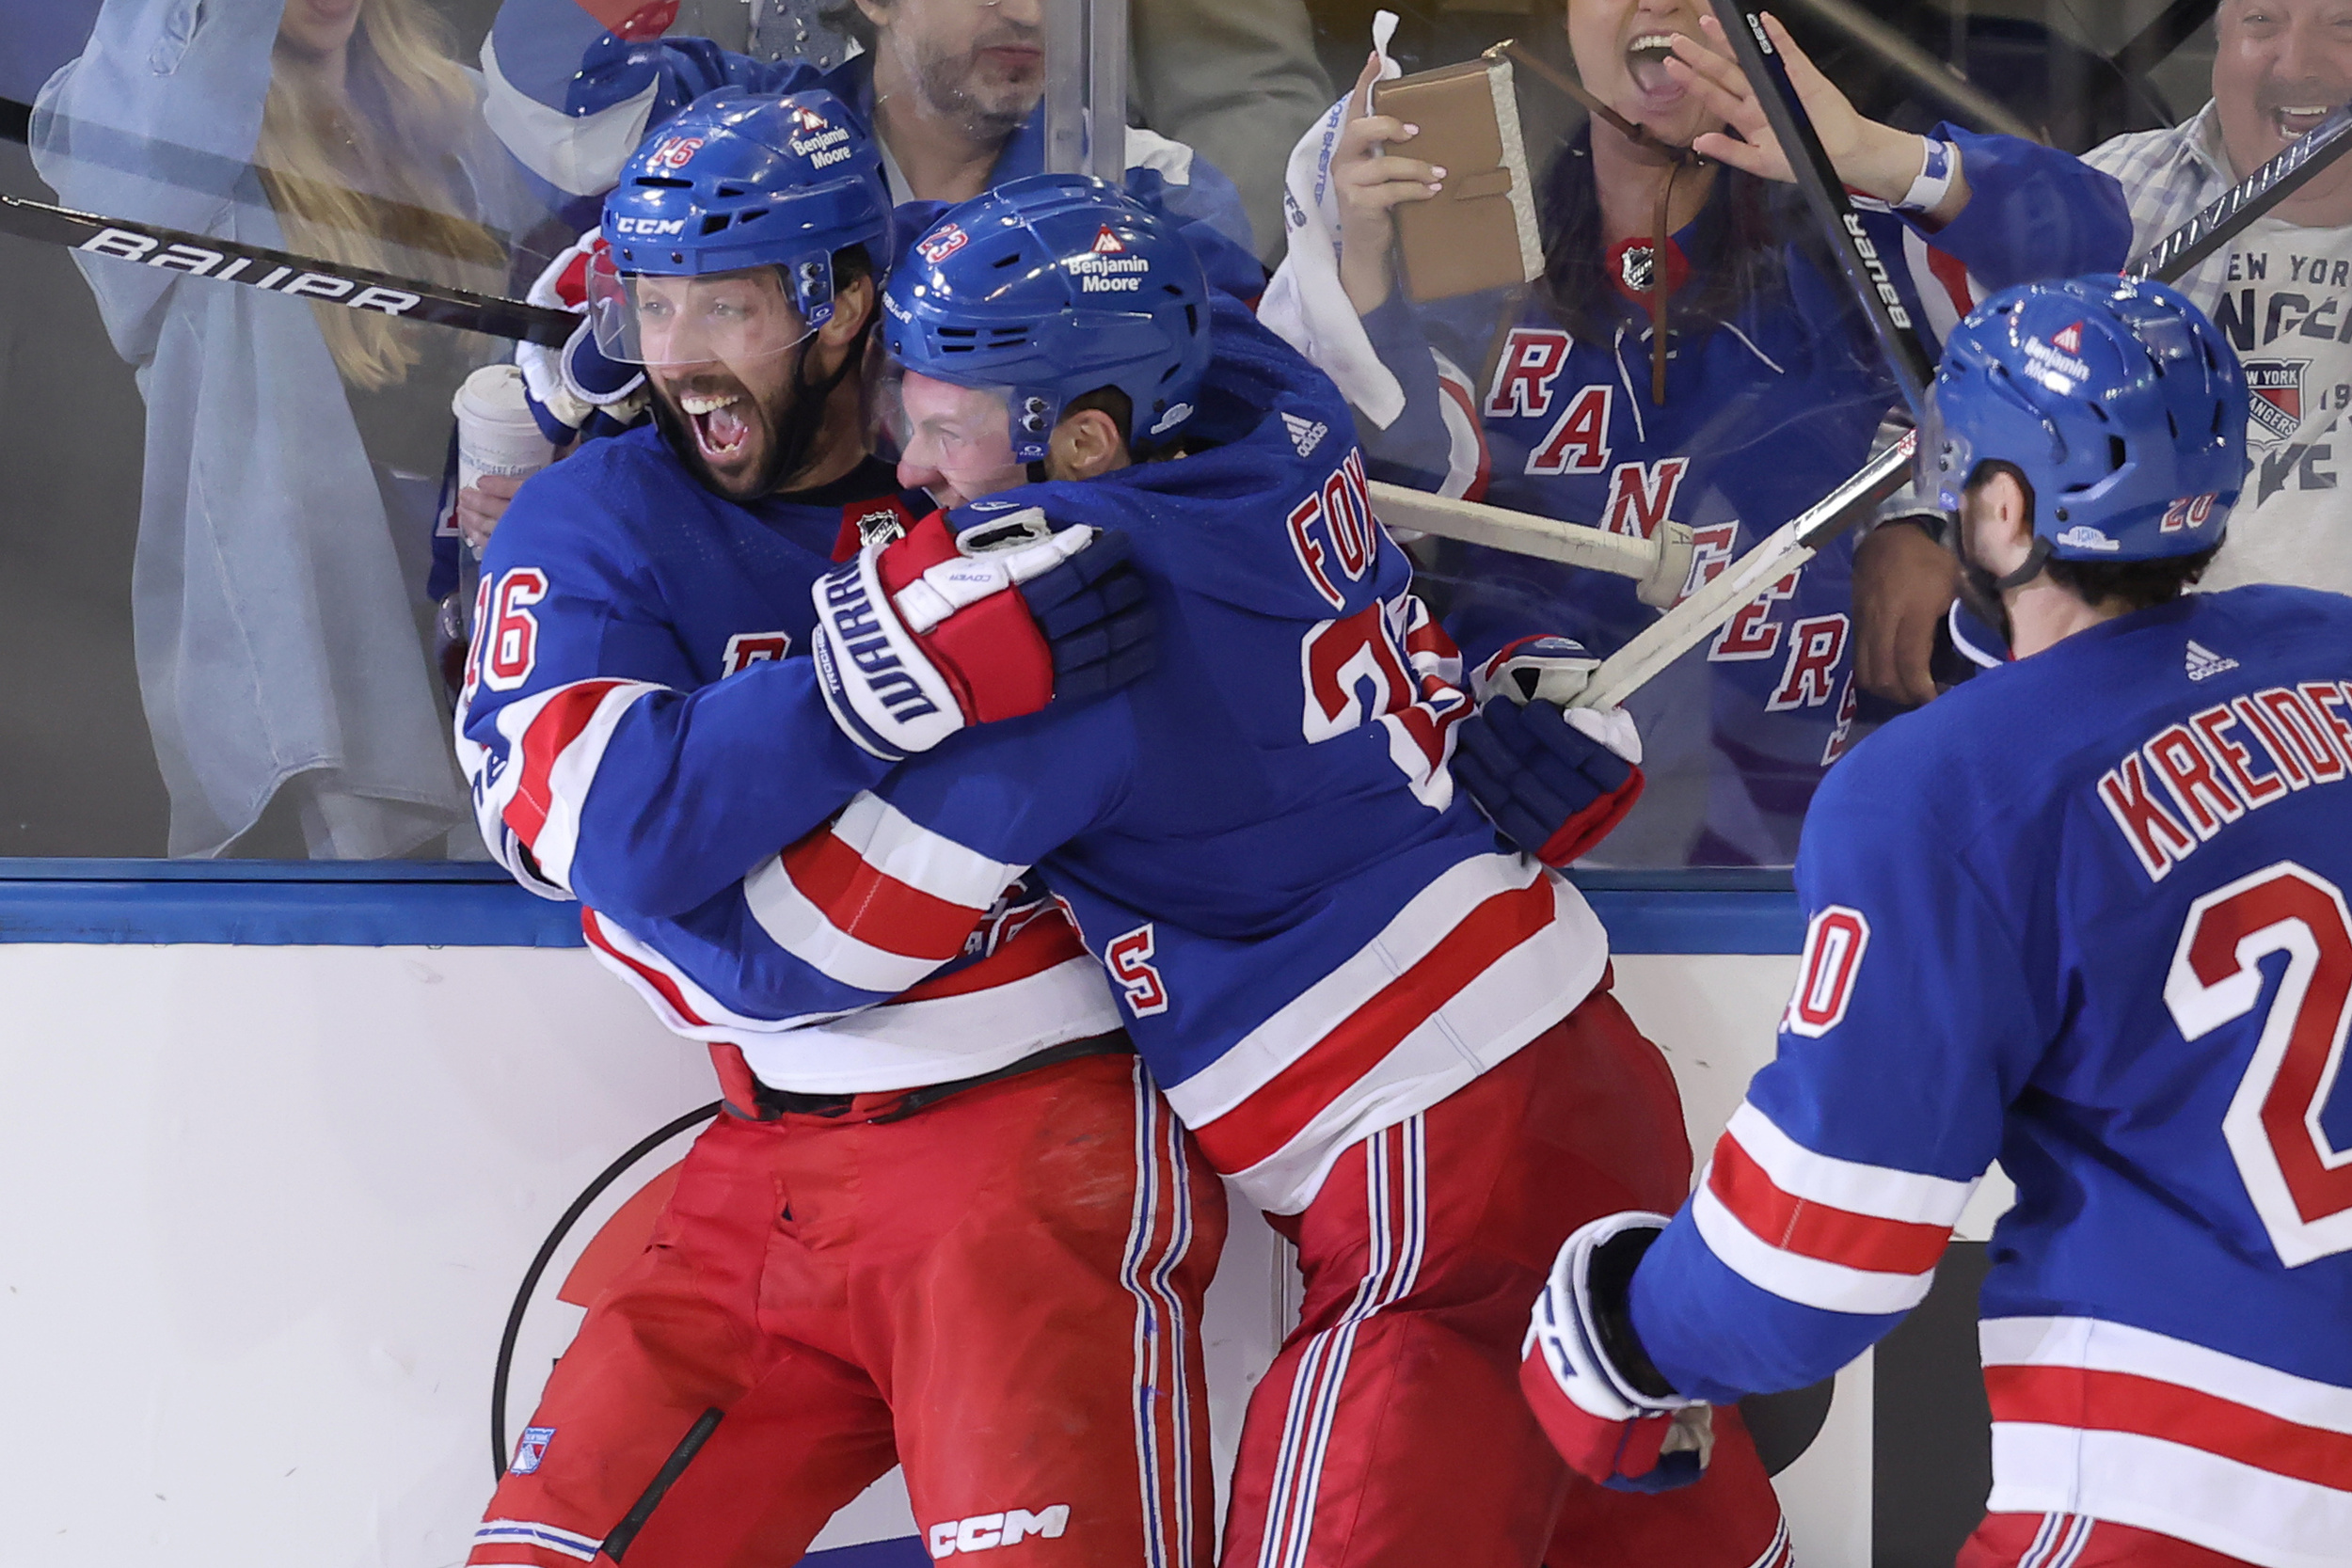 rangers special teams, goaltending help them take control against hurricanes